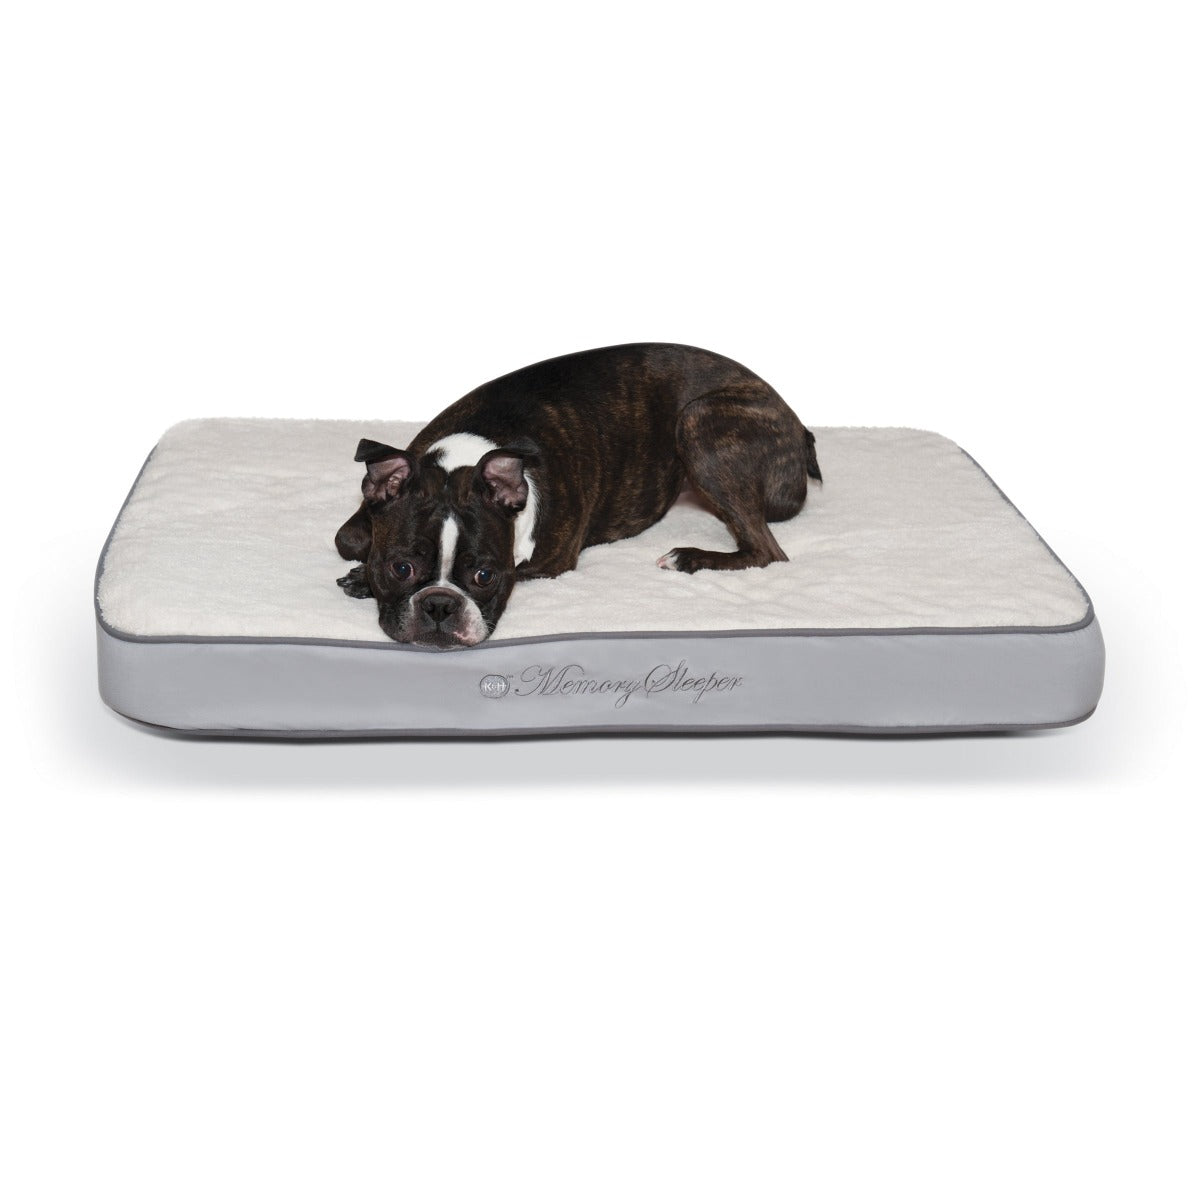 K&H Pet Products Memory Sleeper Pet Bed